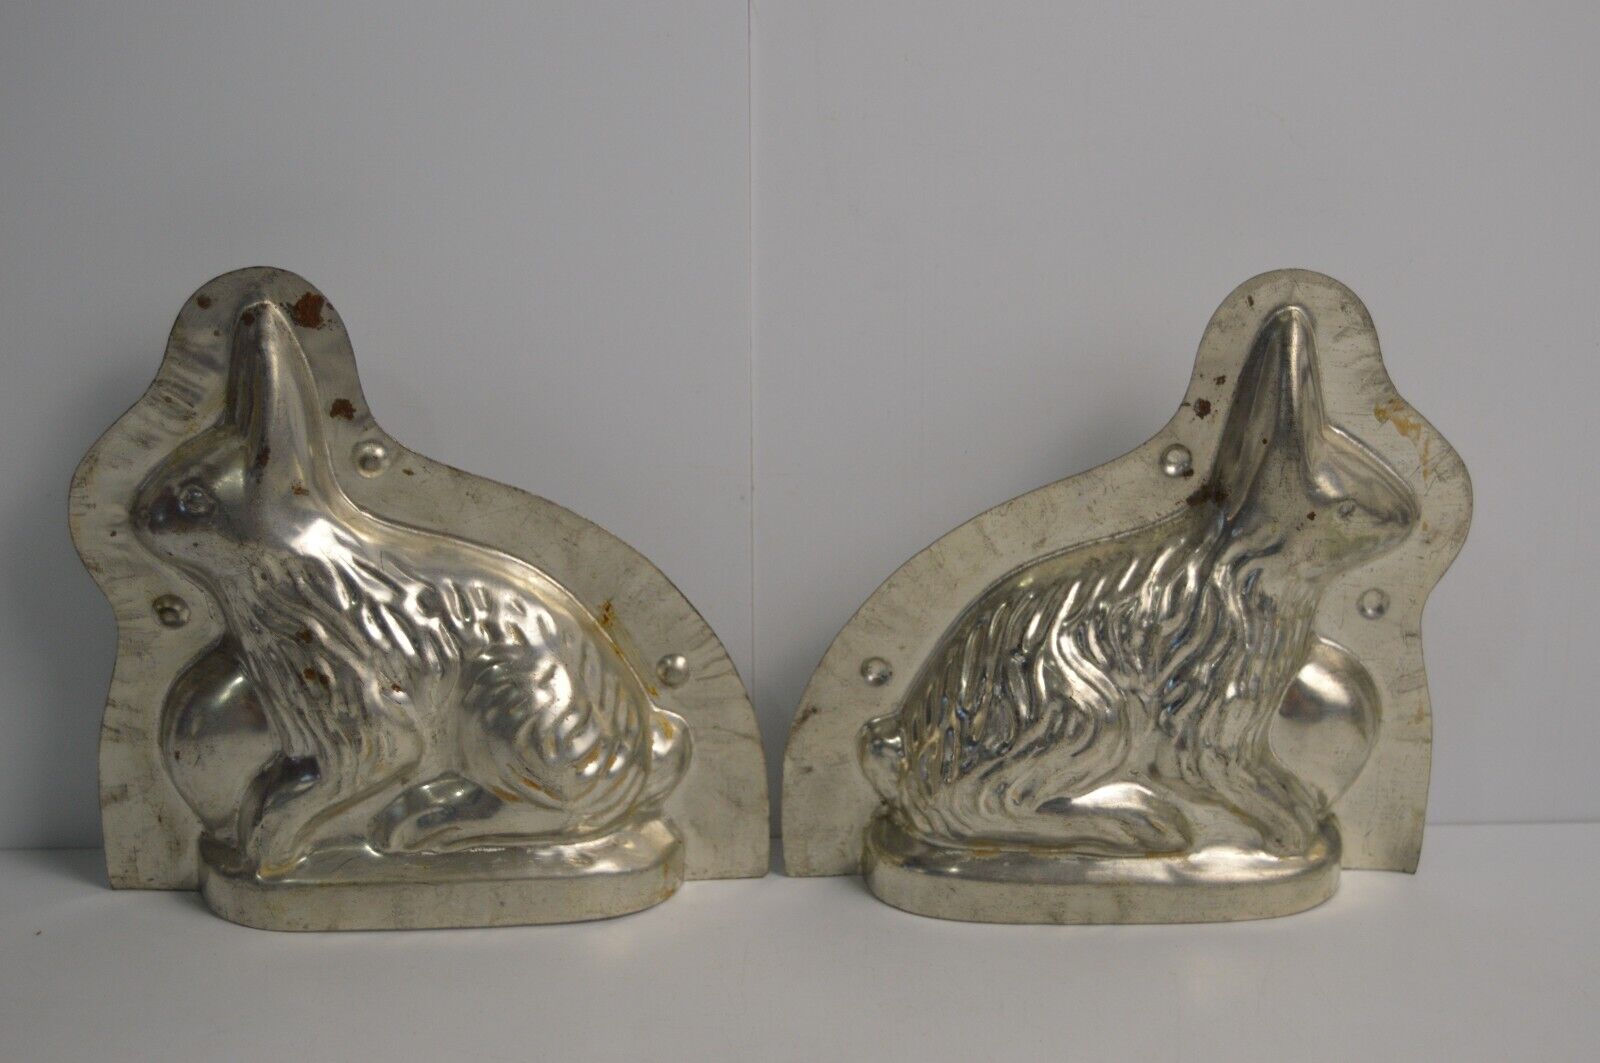 Vintage Metal Chocolate Bunny Mold 2 Pcs 3-D Candy Sculpture Easter Collectible